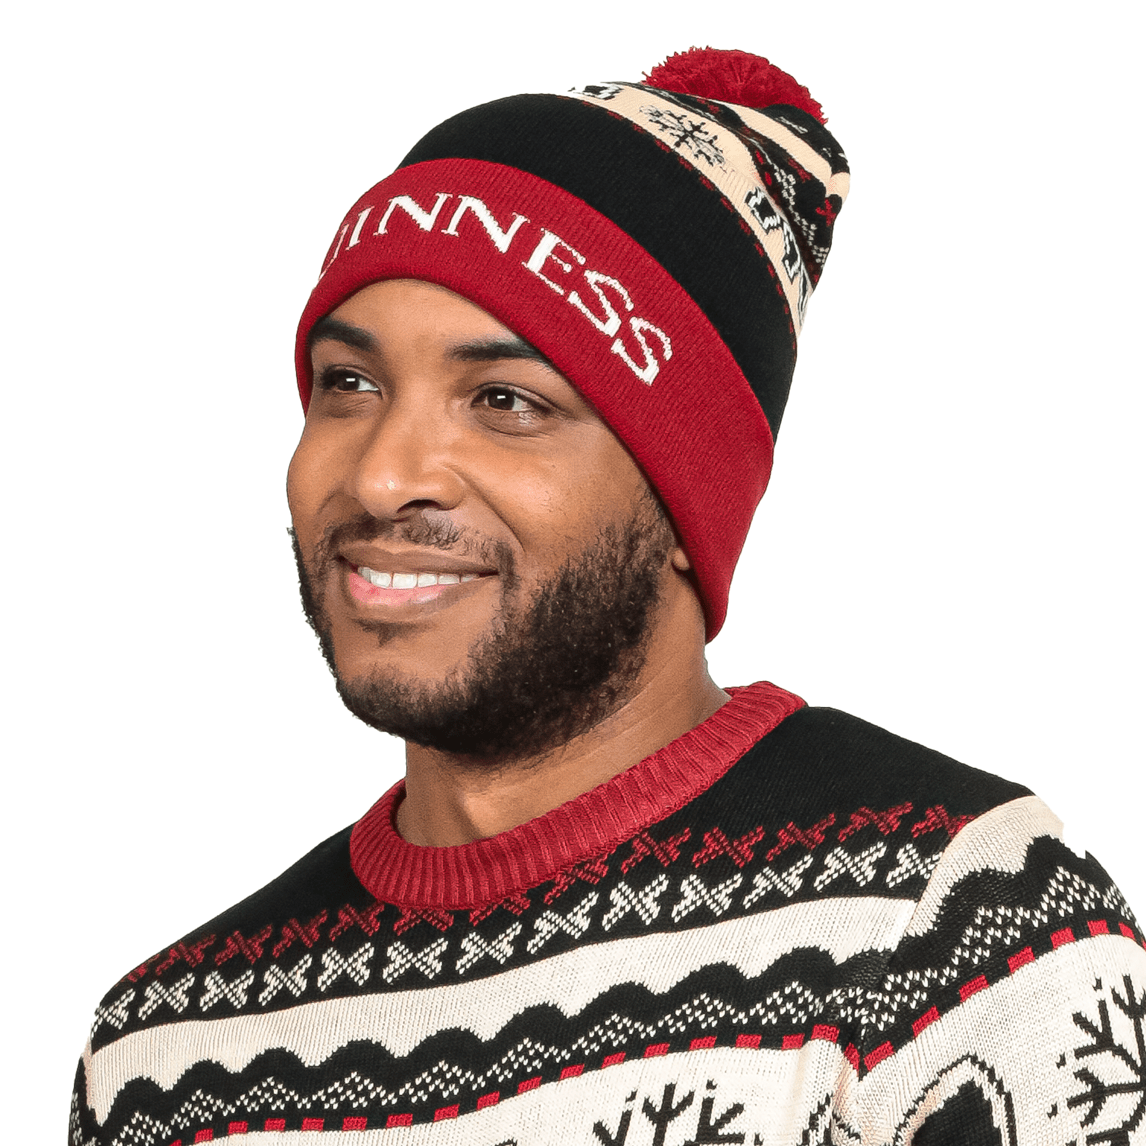 A man wearing an Official Pint Winter Beanie adorned with snowflakes, created by Guinness UK.